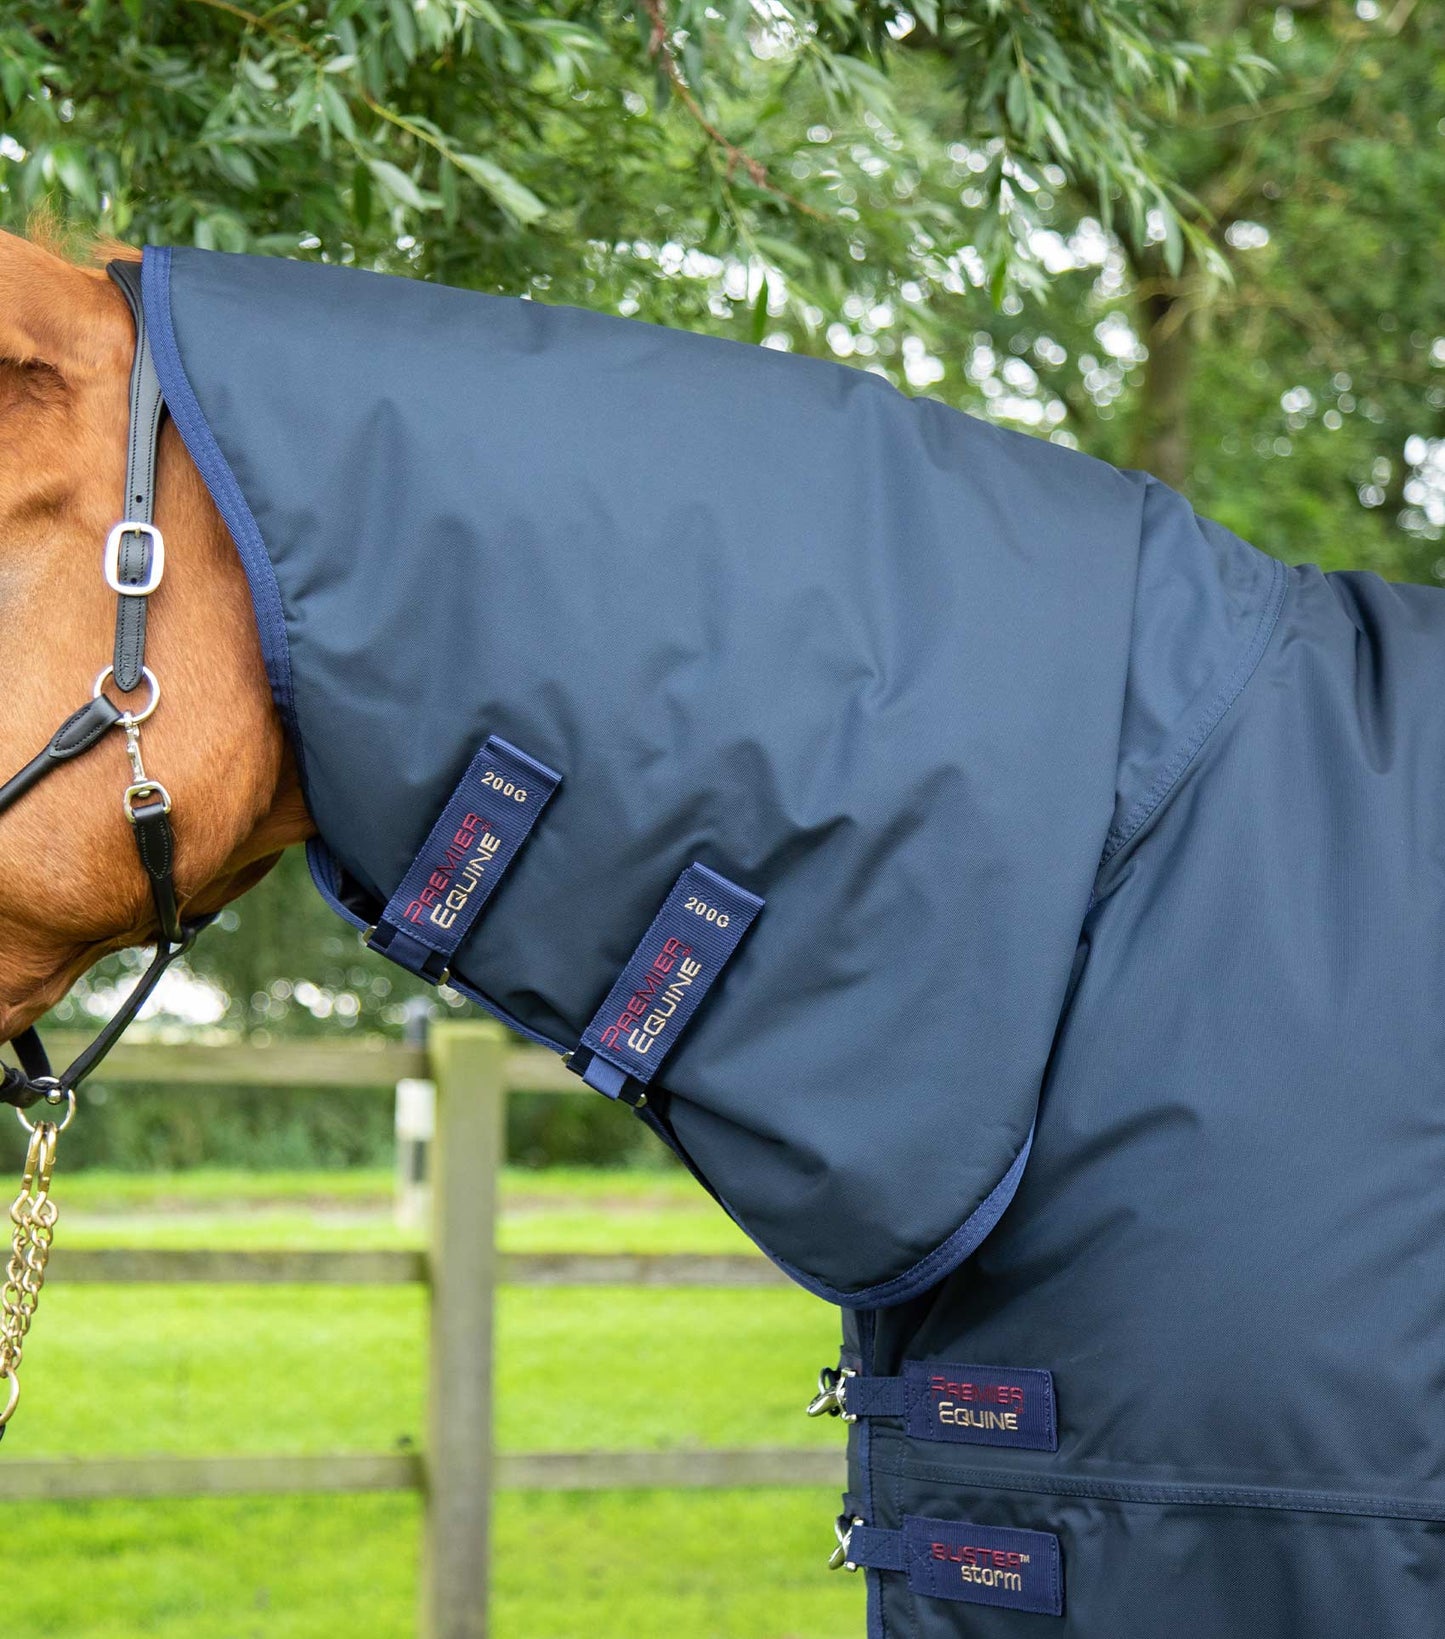 Premier Equine Buster Storm 220g Combo Turnout Rug with Classic Neck